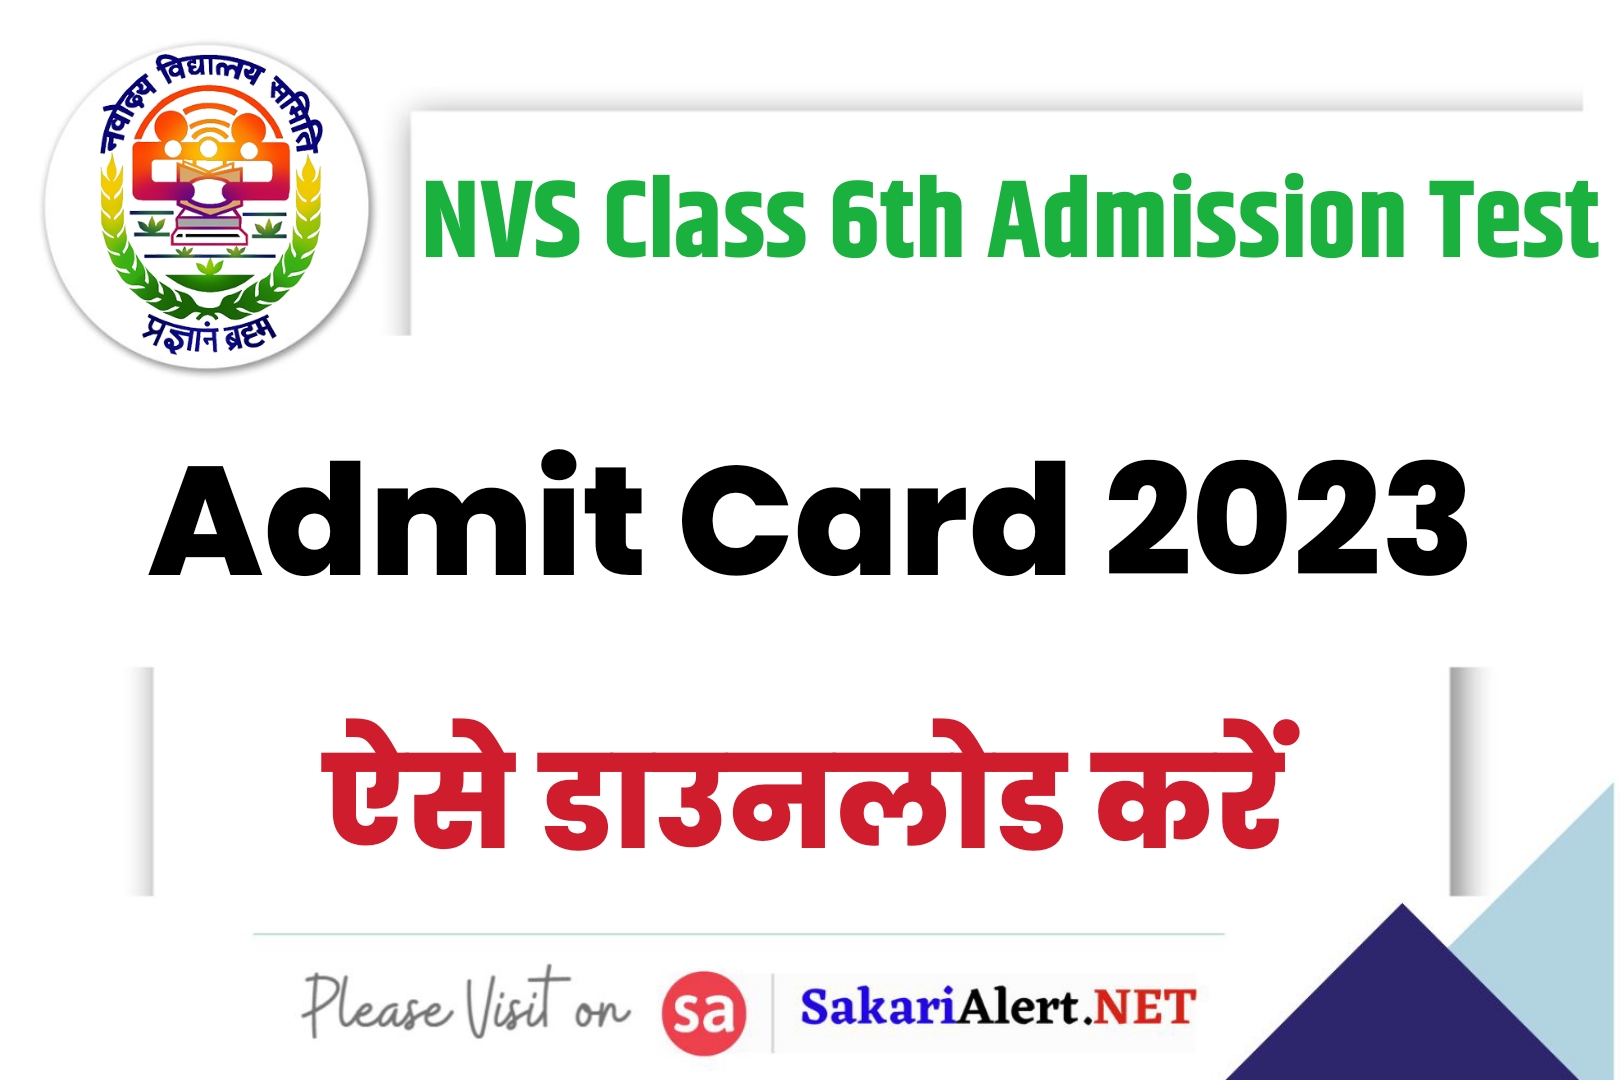 NVS Class 6th Admission Test Admit Card 2023